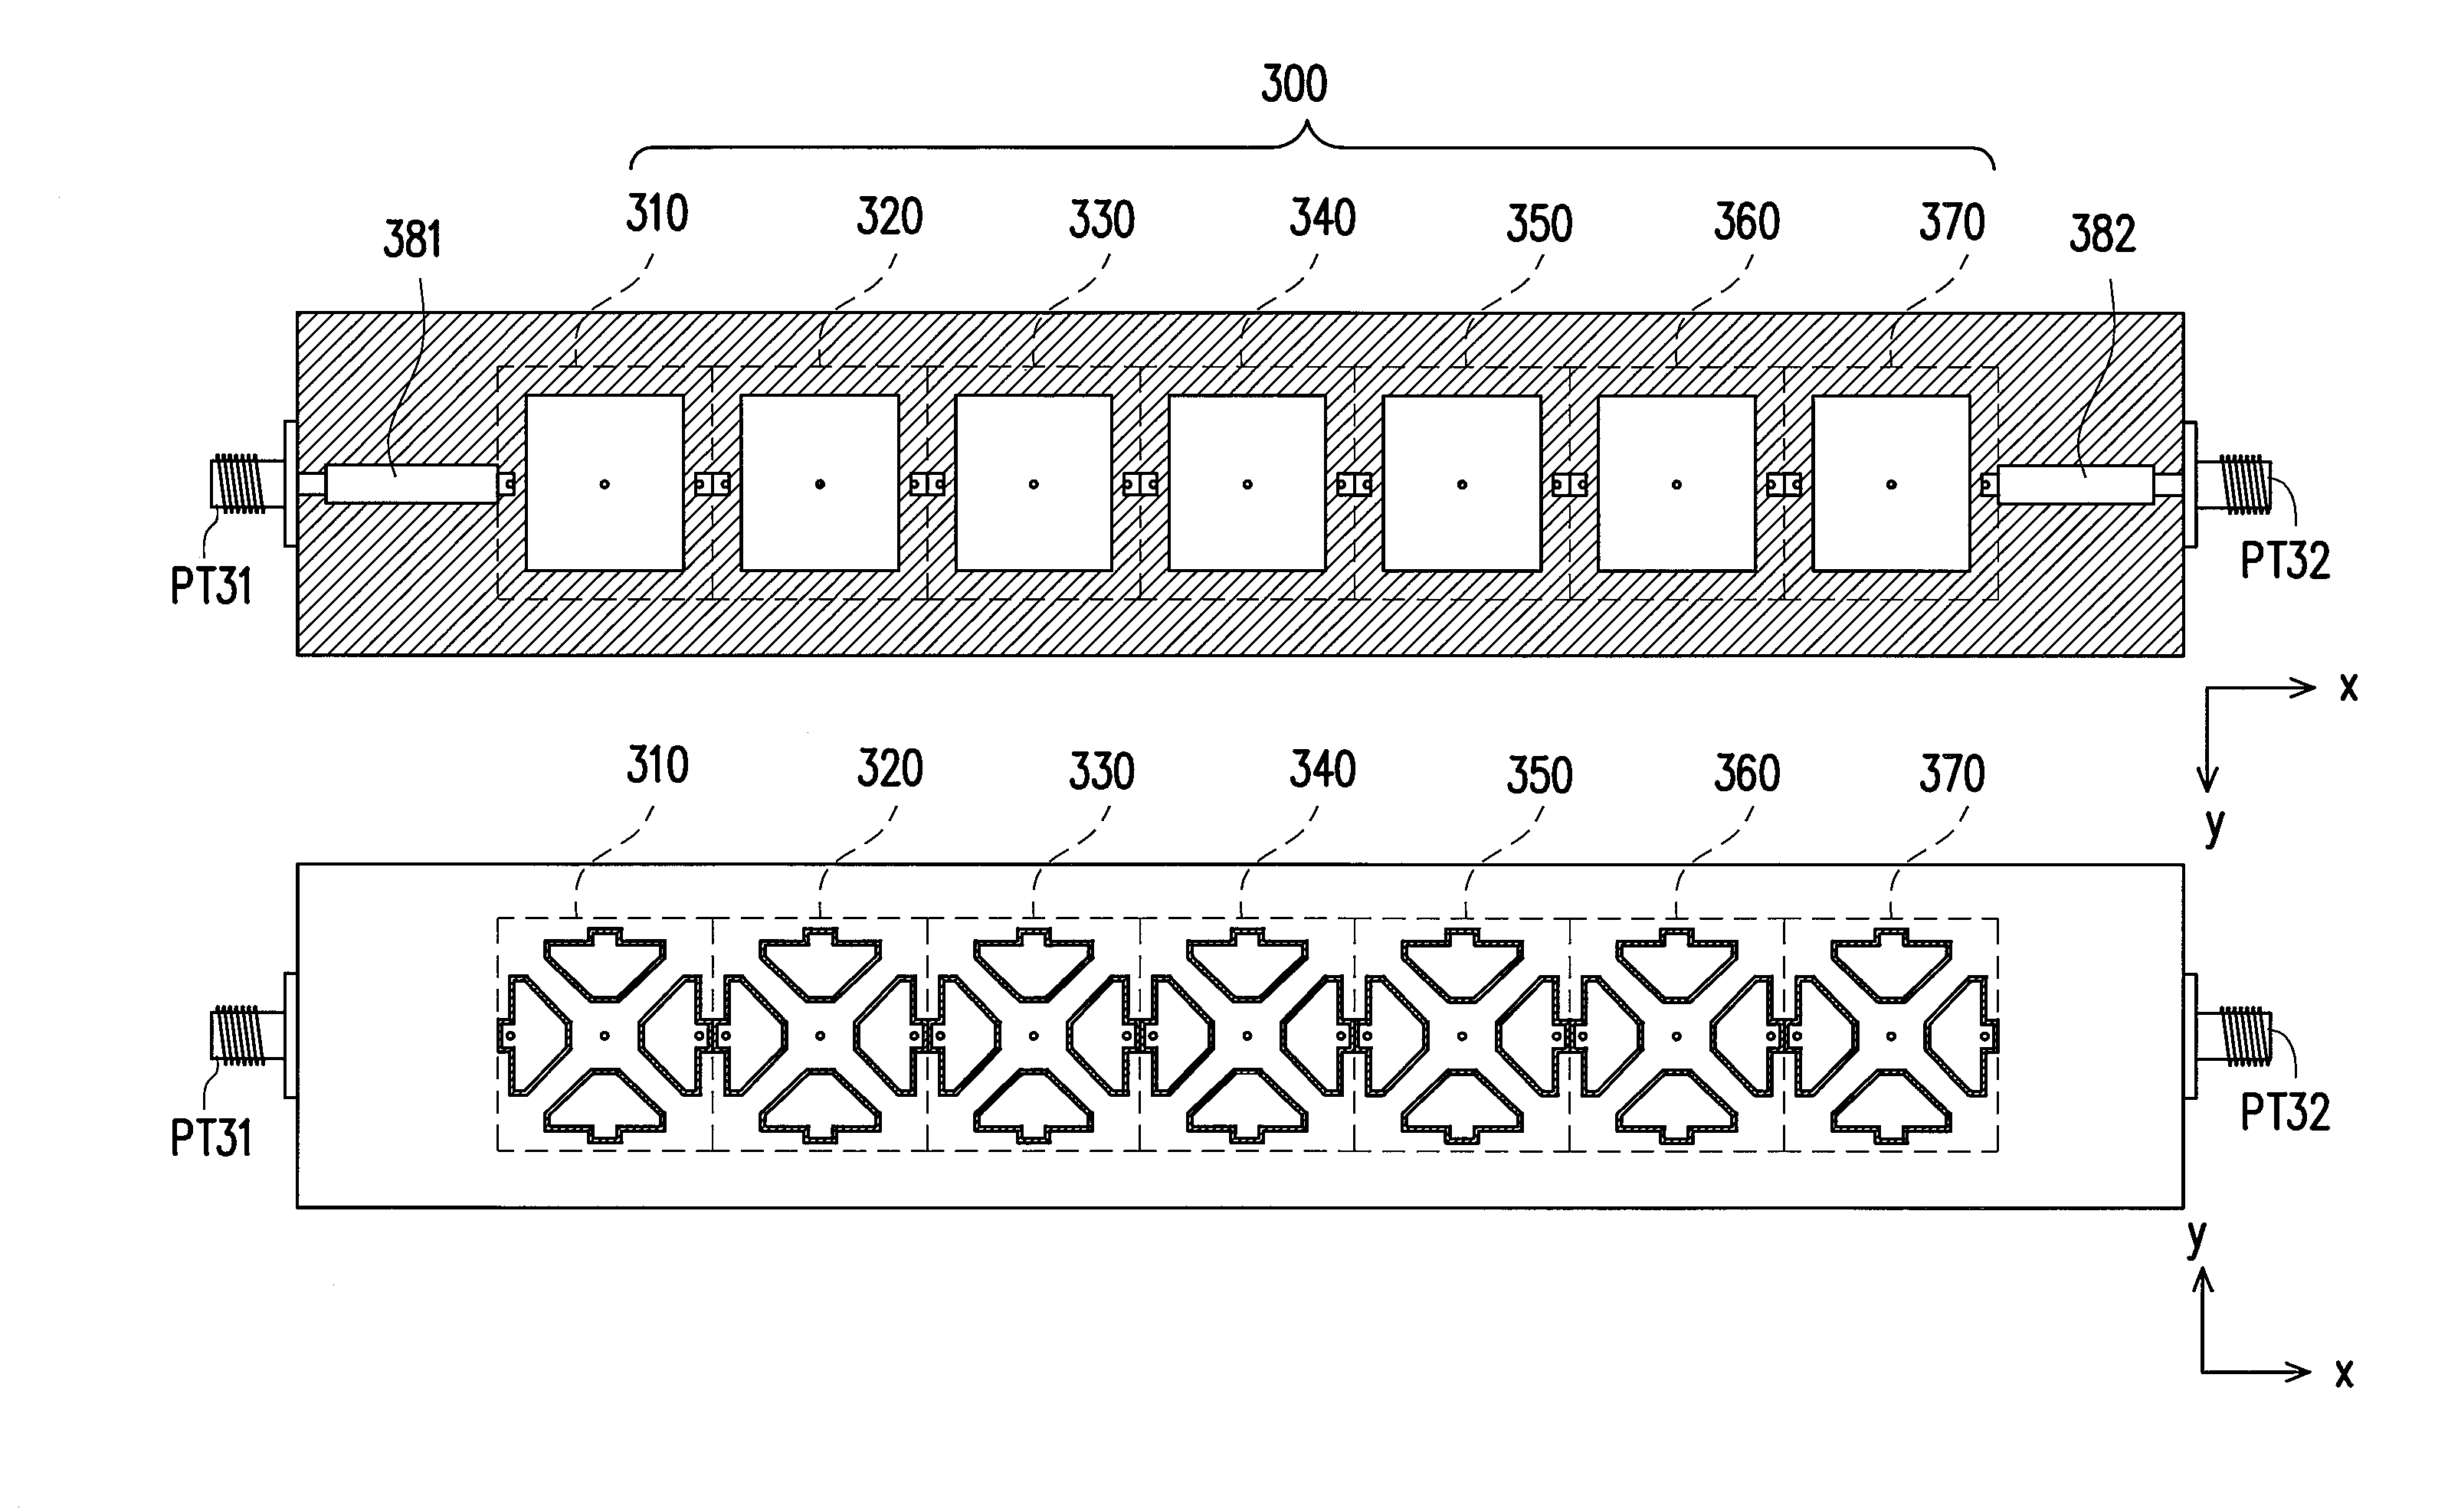 Leaky-wave antenna capable of multi-plane scanning